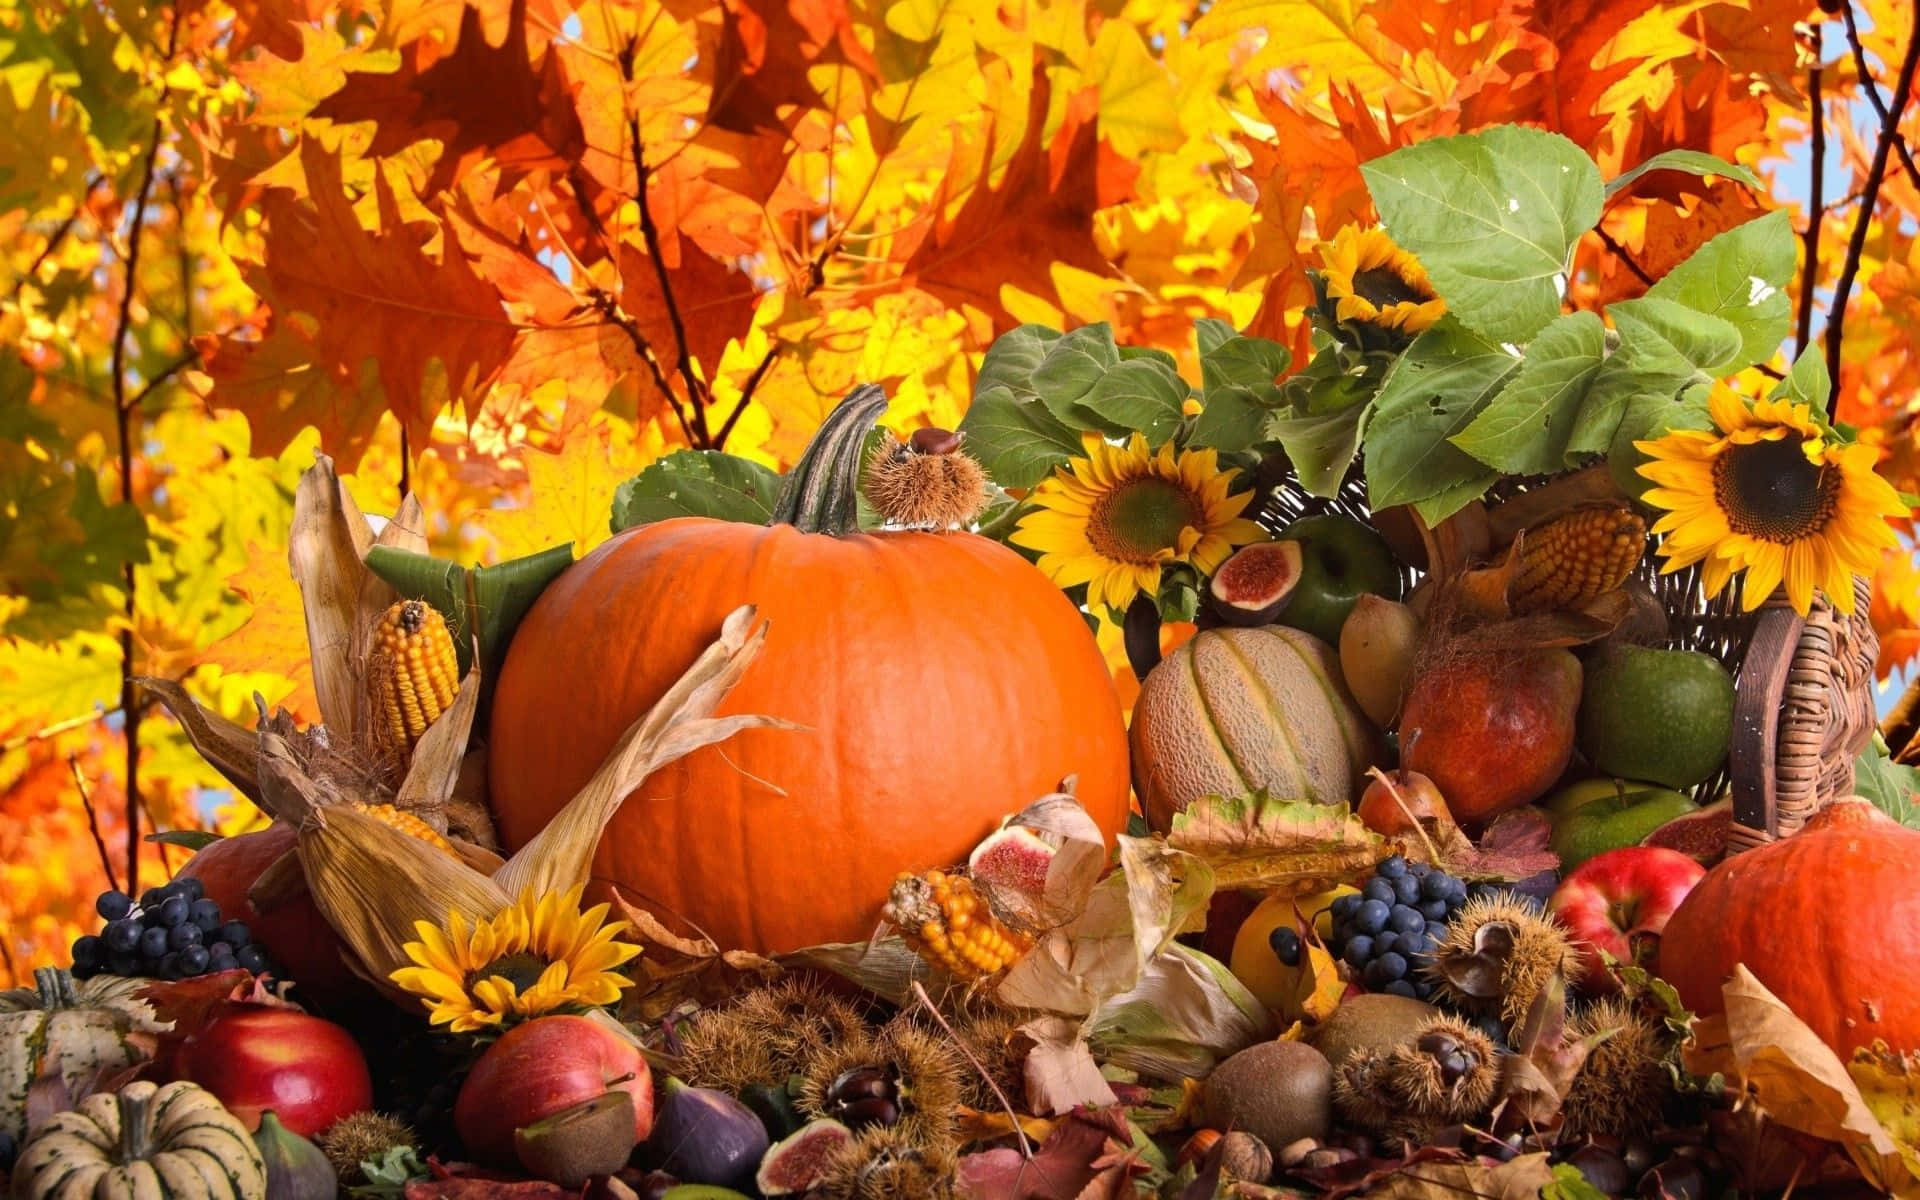 A Group Of Pumpkins, Sunflowers, And Other Fall Vegetables Wallpaper